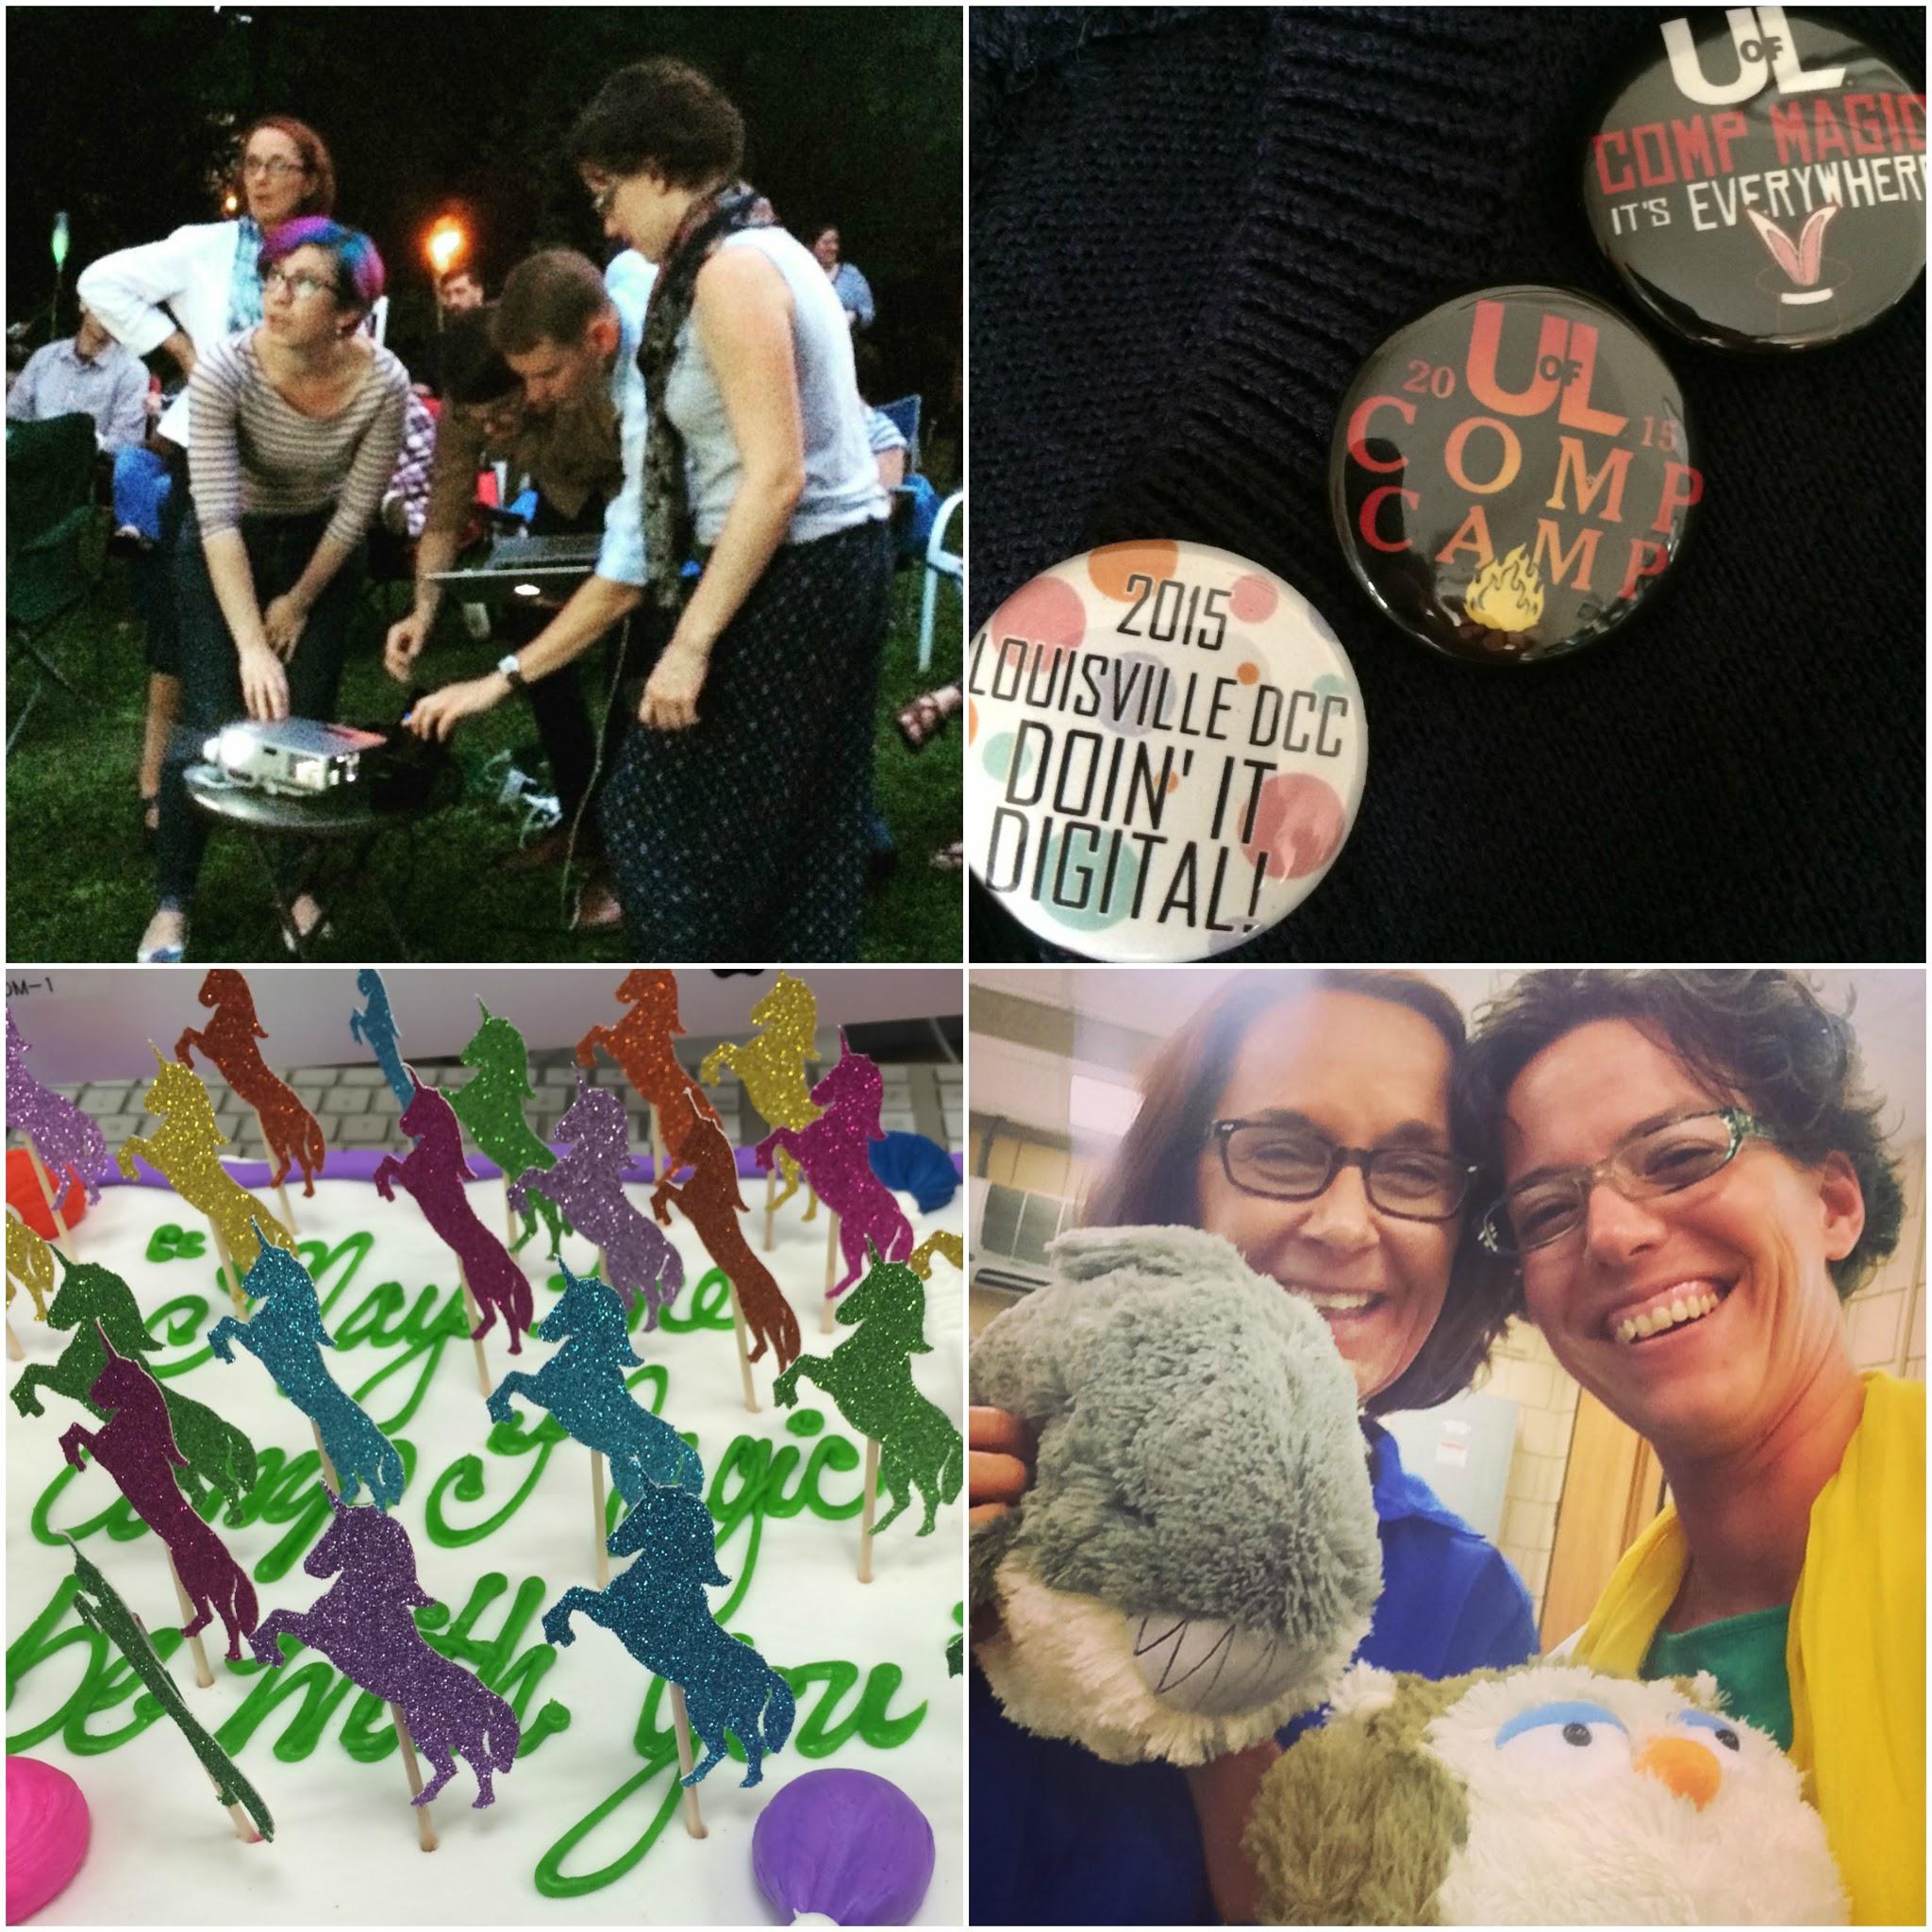 Photo collage of Brenda's work at University of Louisville. Clockwise, the photos include a group hovering around a projector; a collection of three buttons; a cake decorated with unicorns; and a smiling selfie of Brenda and Rachel Gramer.